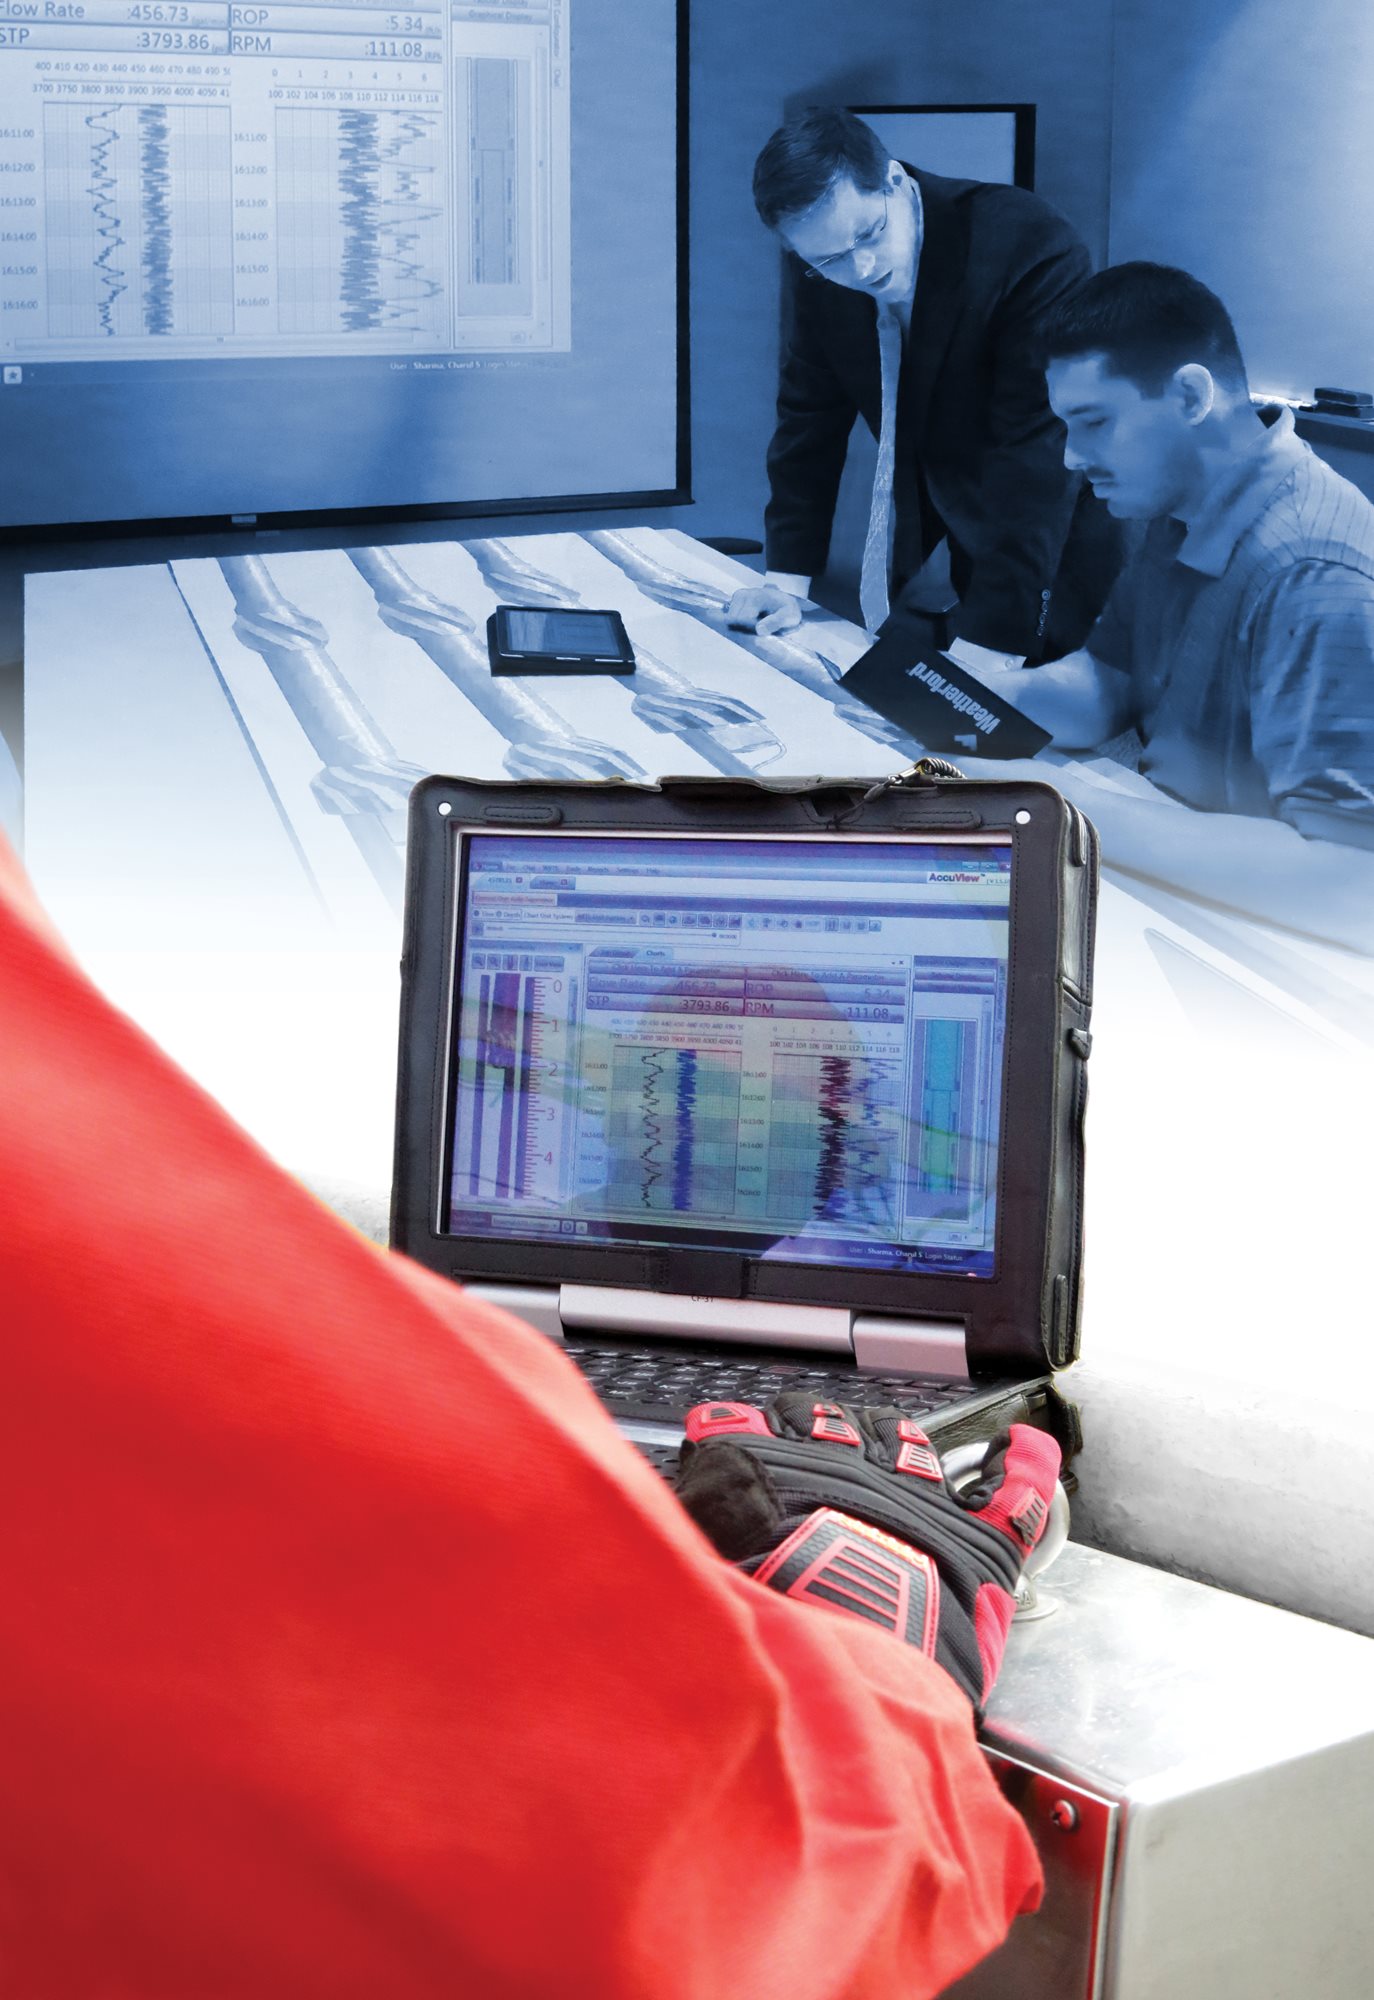 The AccuView system supports real-time collaboration between the rig and offsite experts by securely transmitting key operational data.